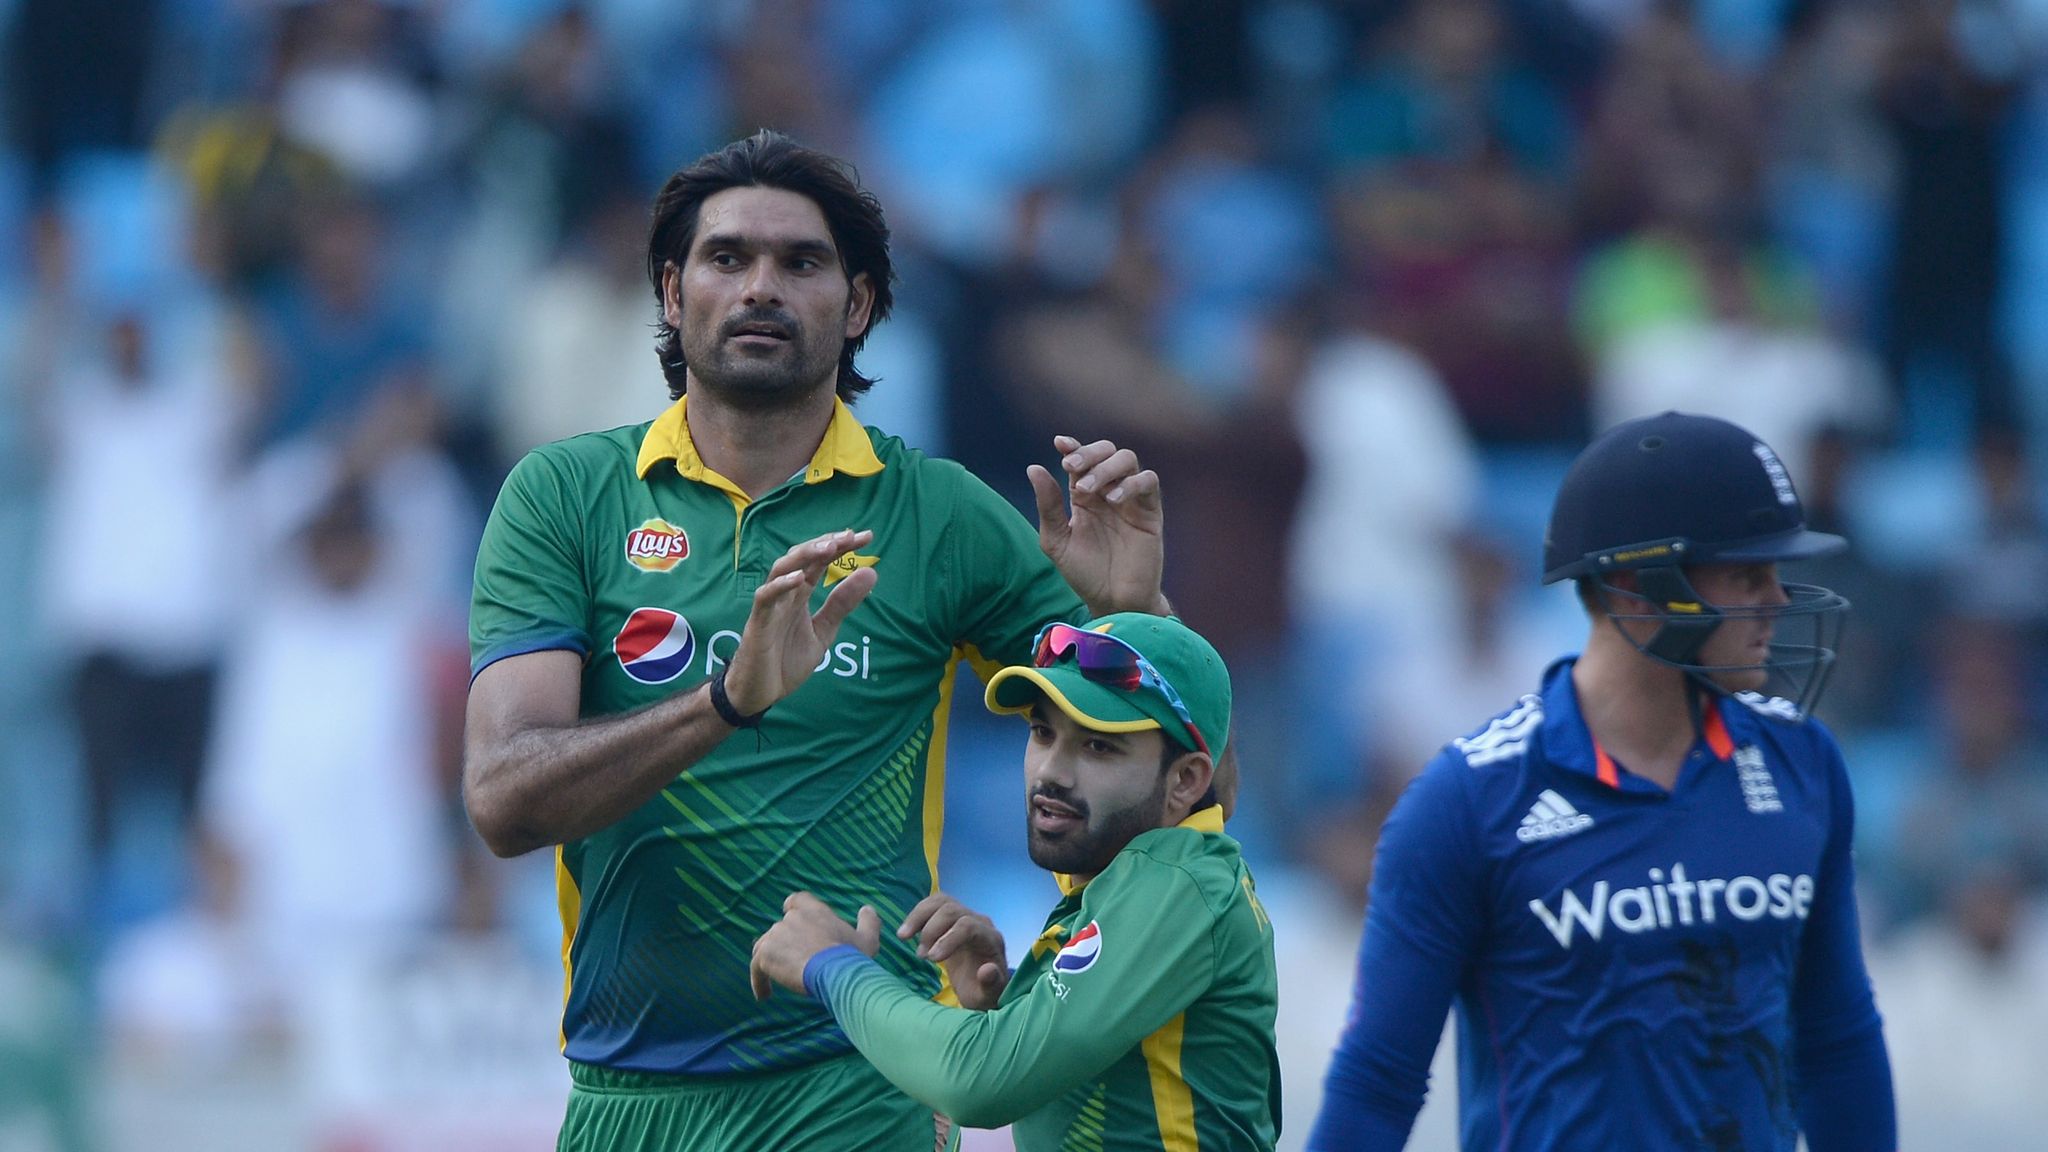 fast bowler Mohammad Irfan has set his sights on returning to the national squad